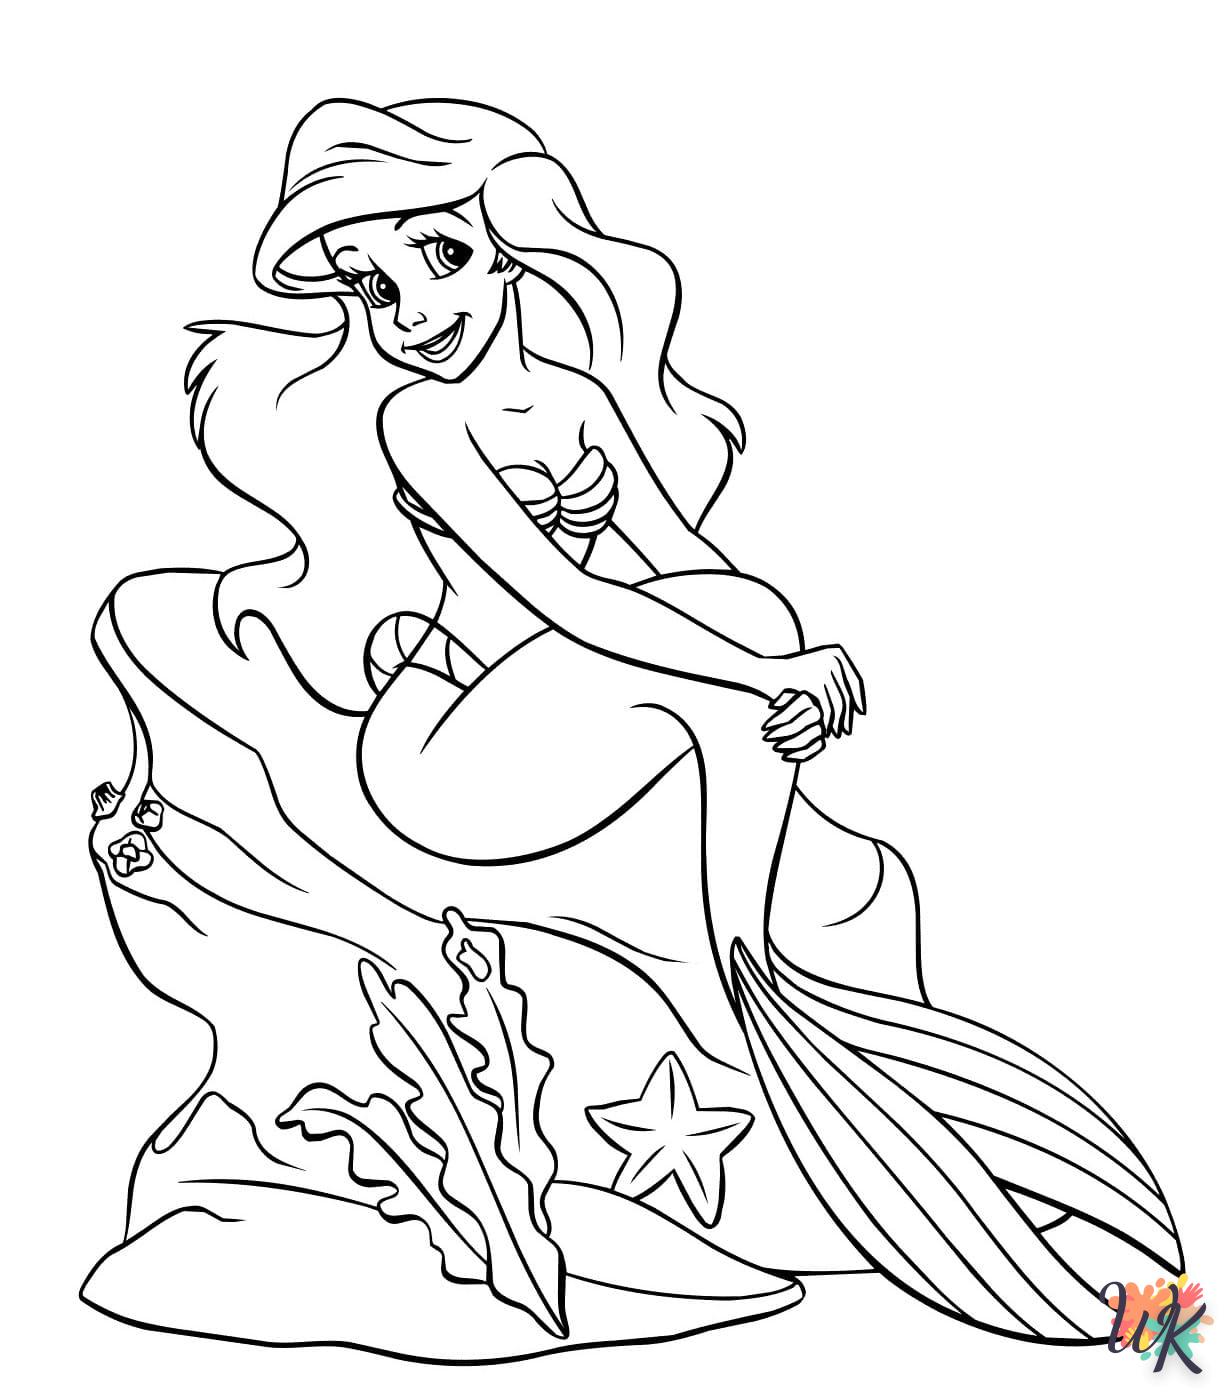 Disney coloring page for children to print 3